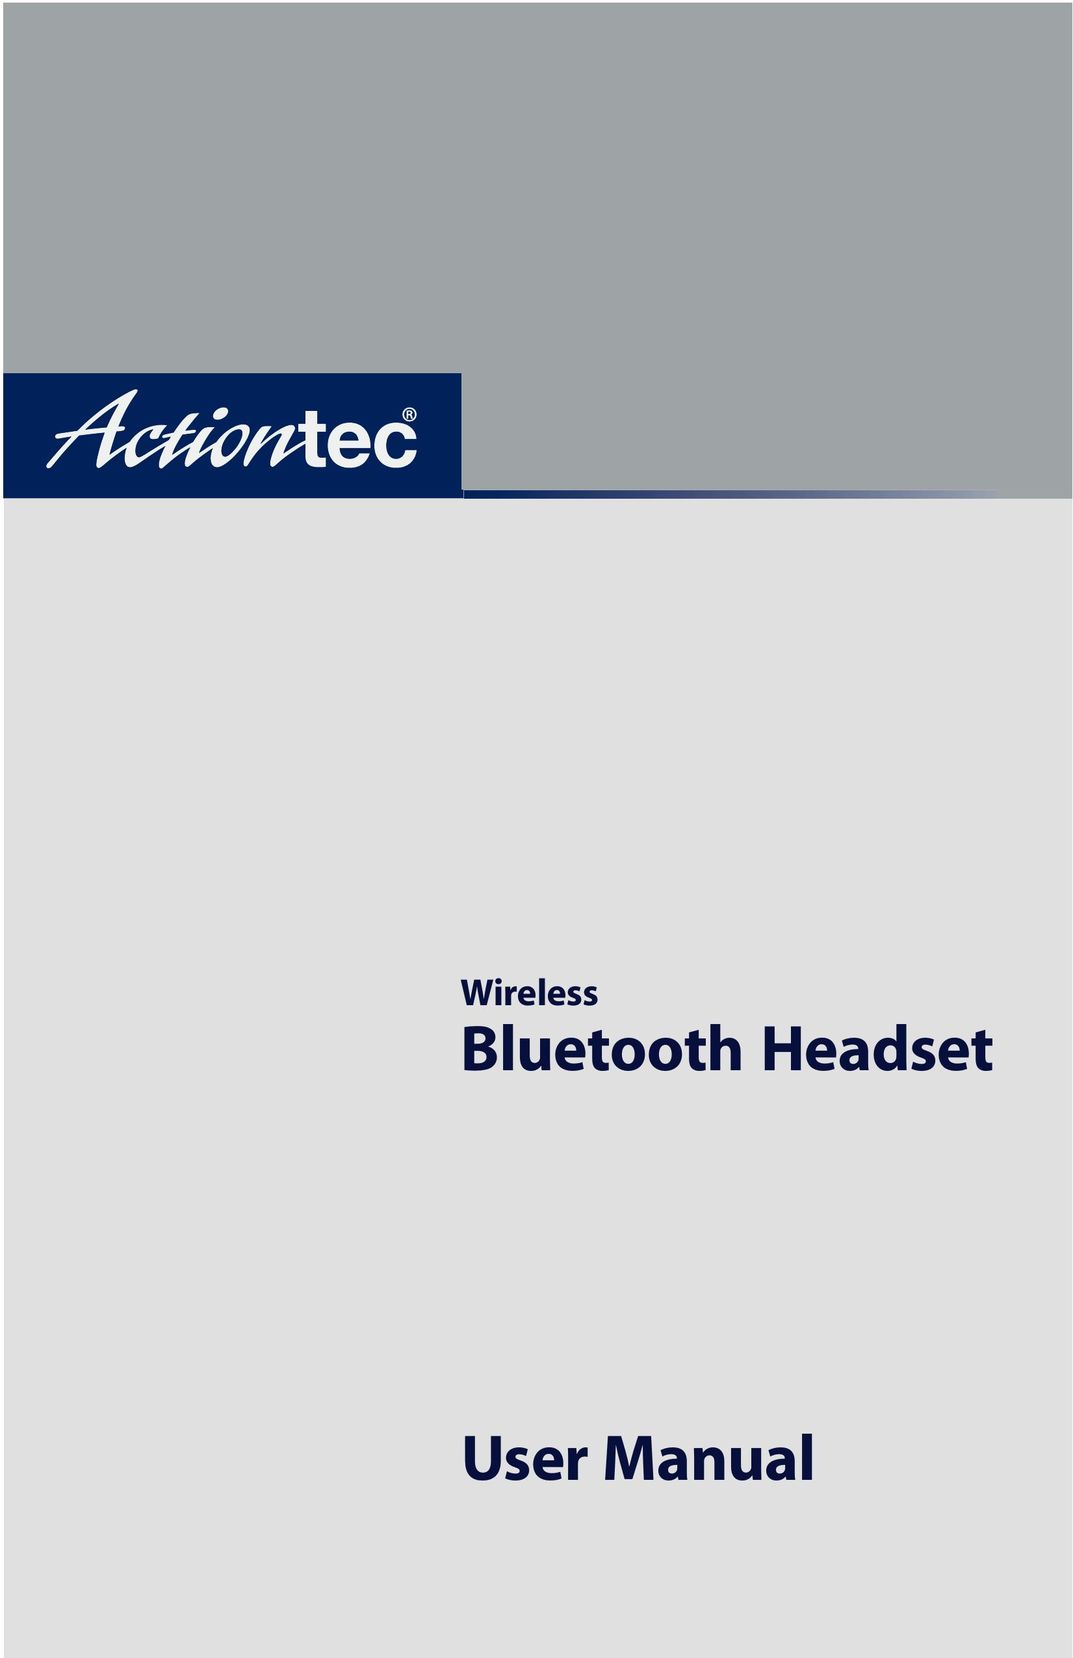 Actiontec electronic BTHS-6023-F Bluetooth Headset User Manual